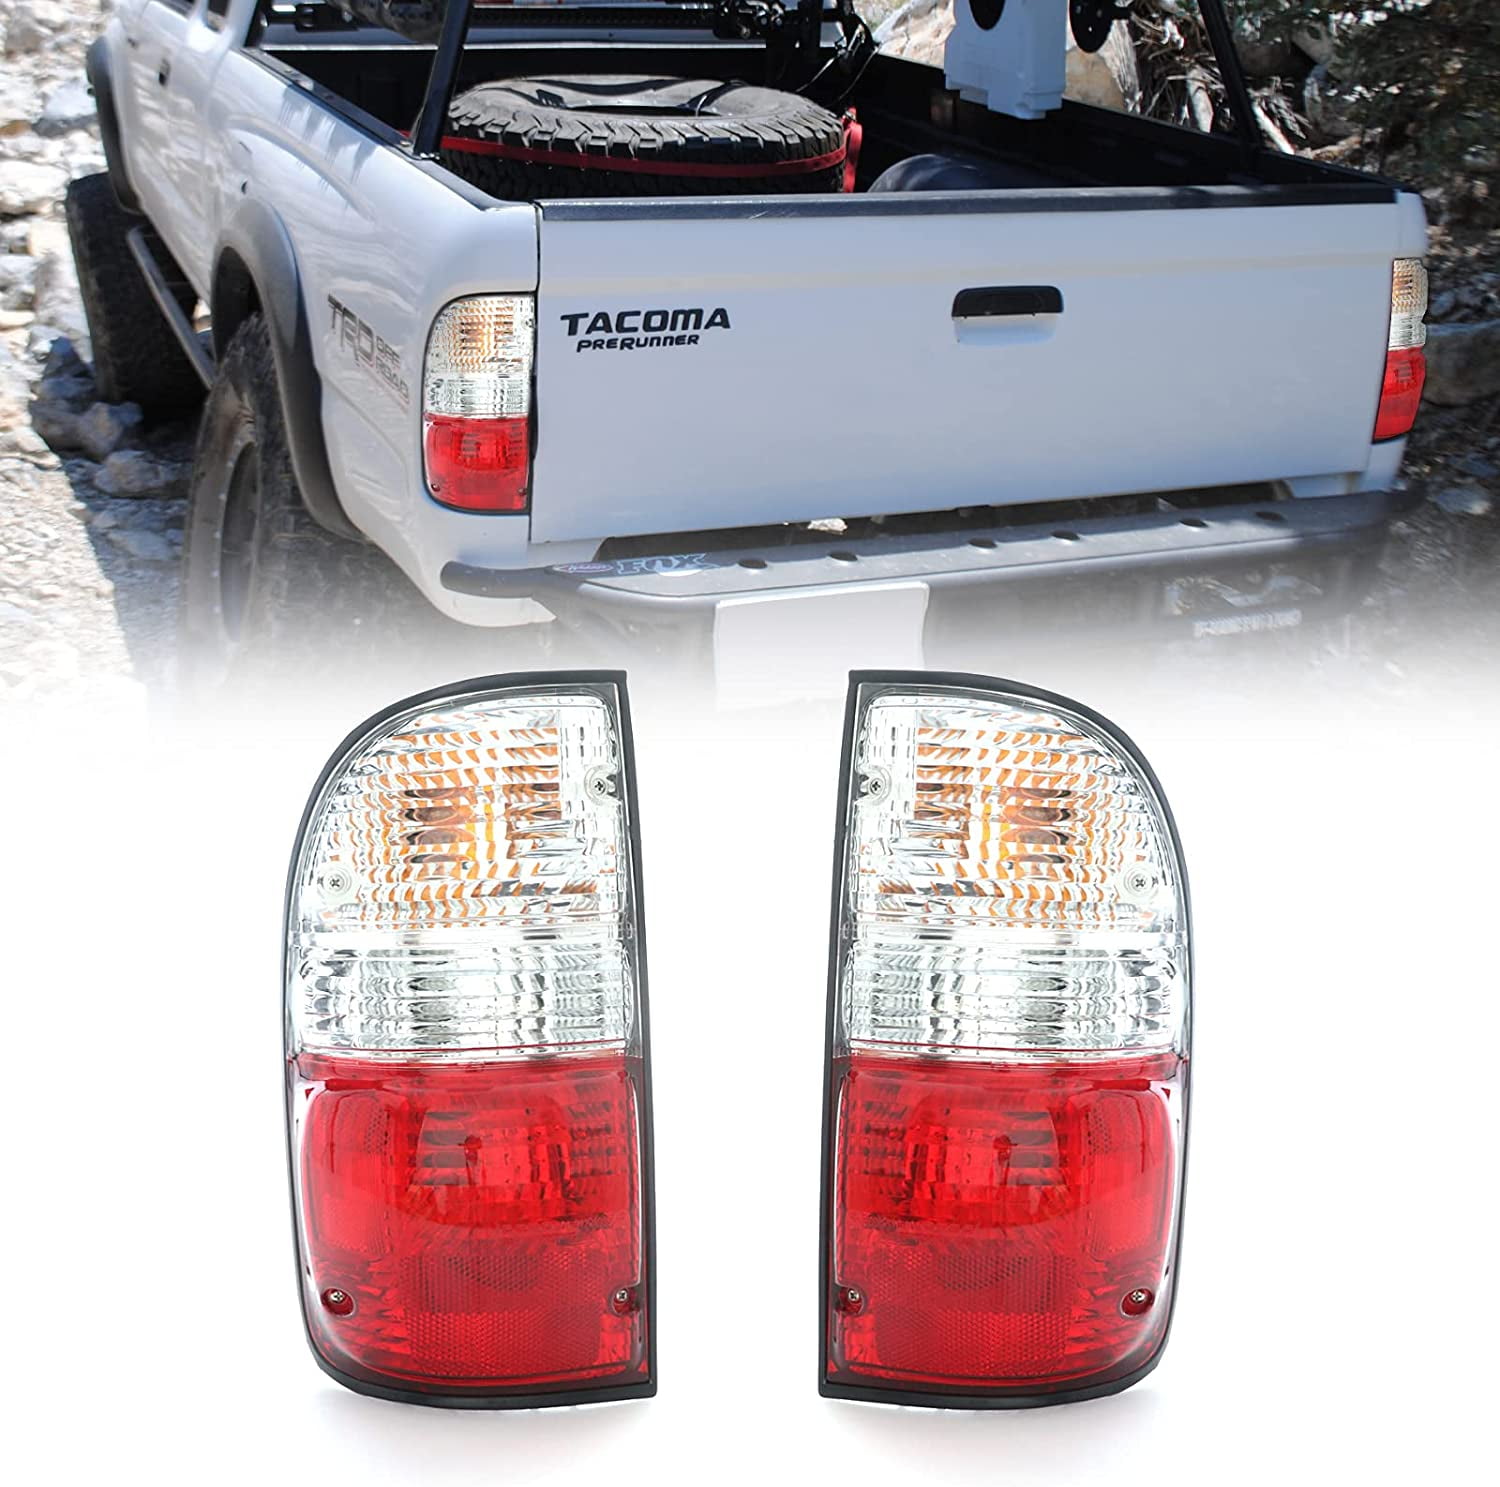 USR DEPO 01-04 Tacoma Tail Lights - JDM Style Red / Clear Lens Rear Tail  Lamps Set (Left + Right) Compatible with 2001-2004 Toyota Tacoma Pickup  Truck